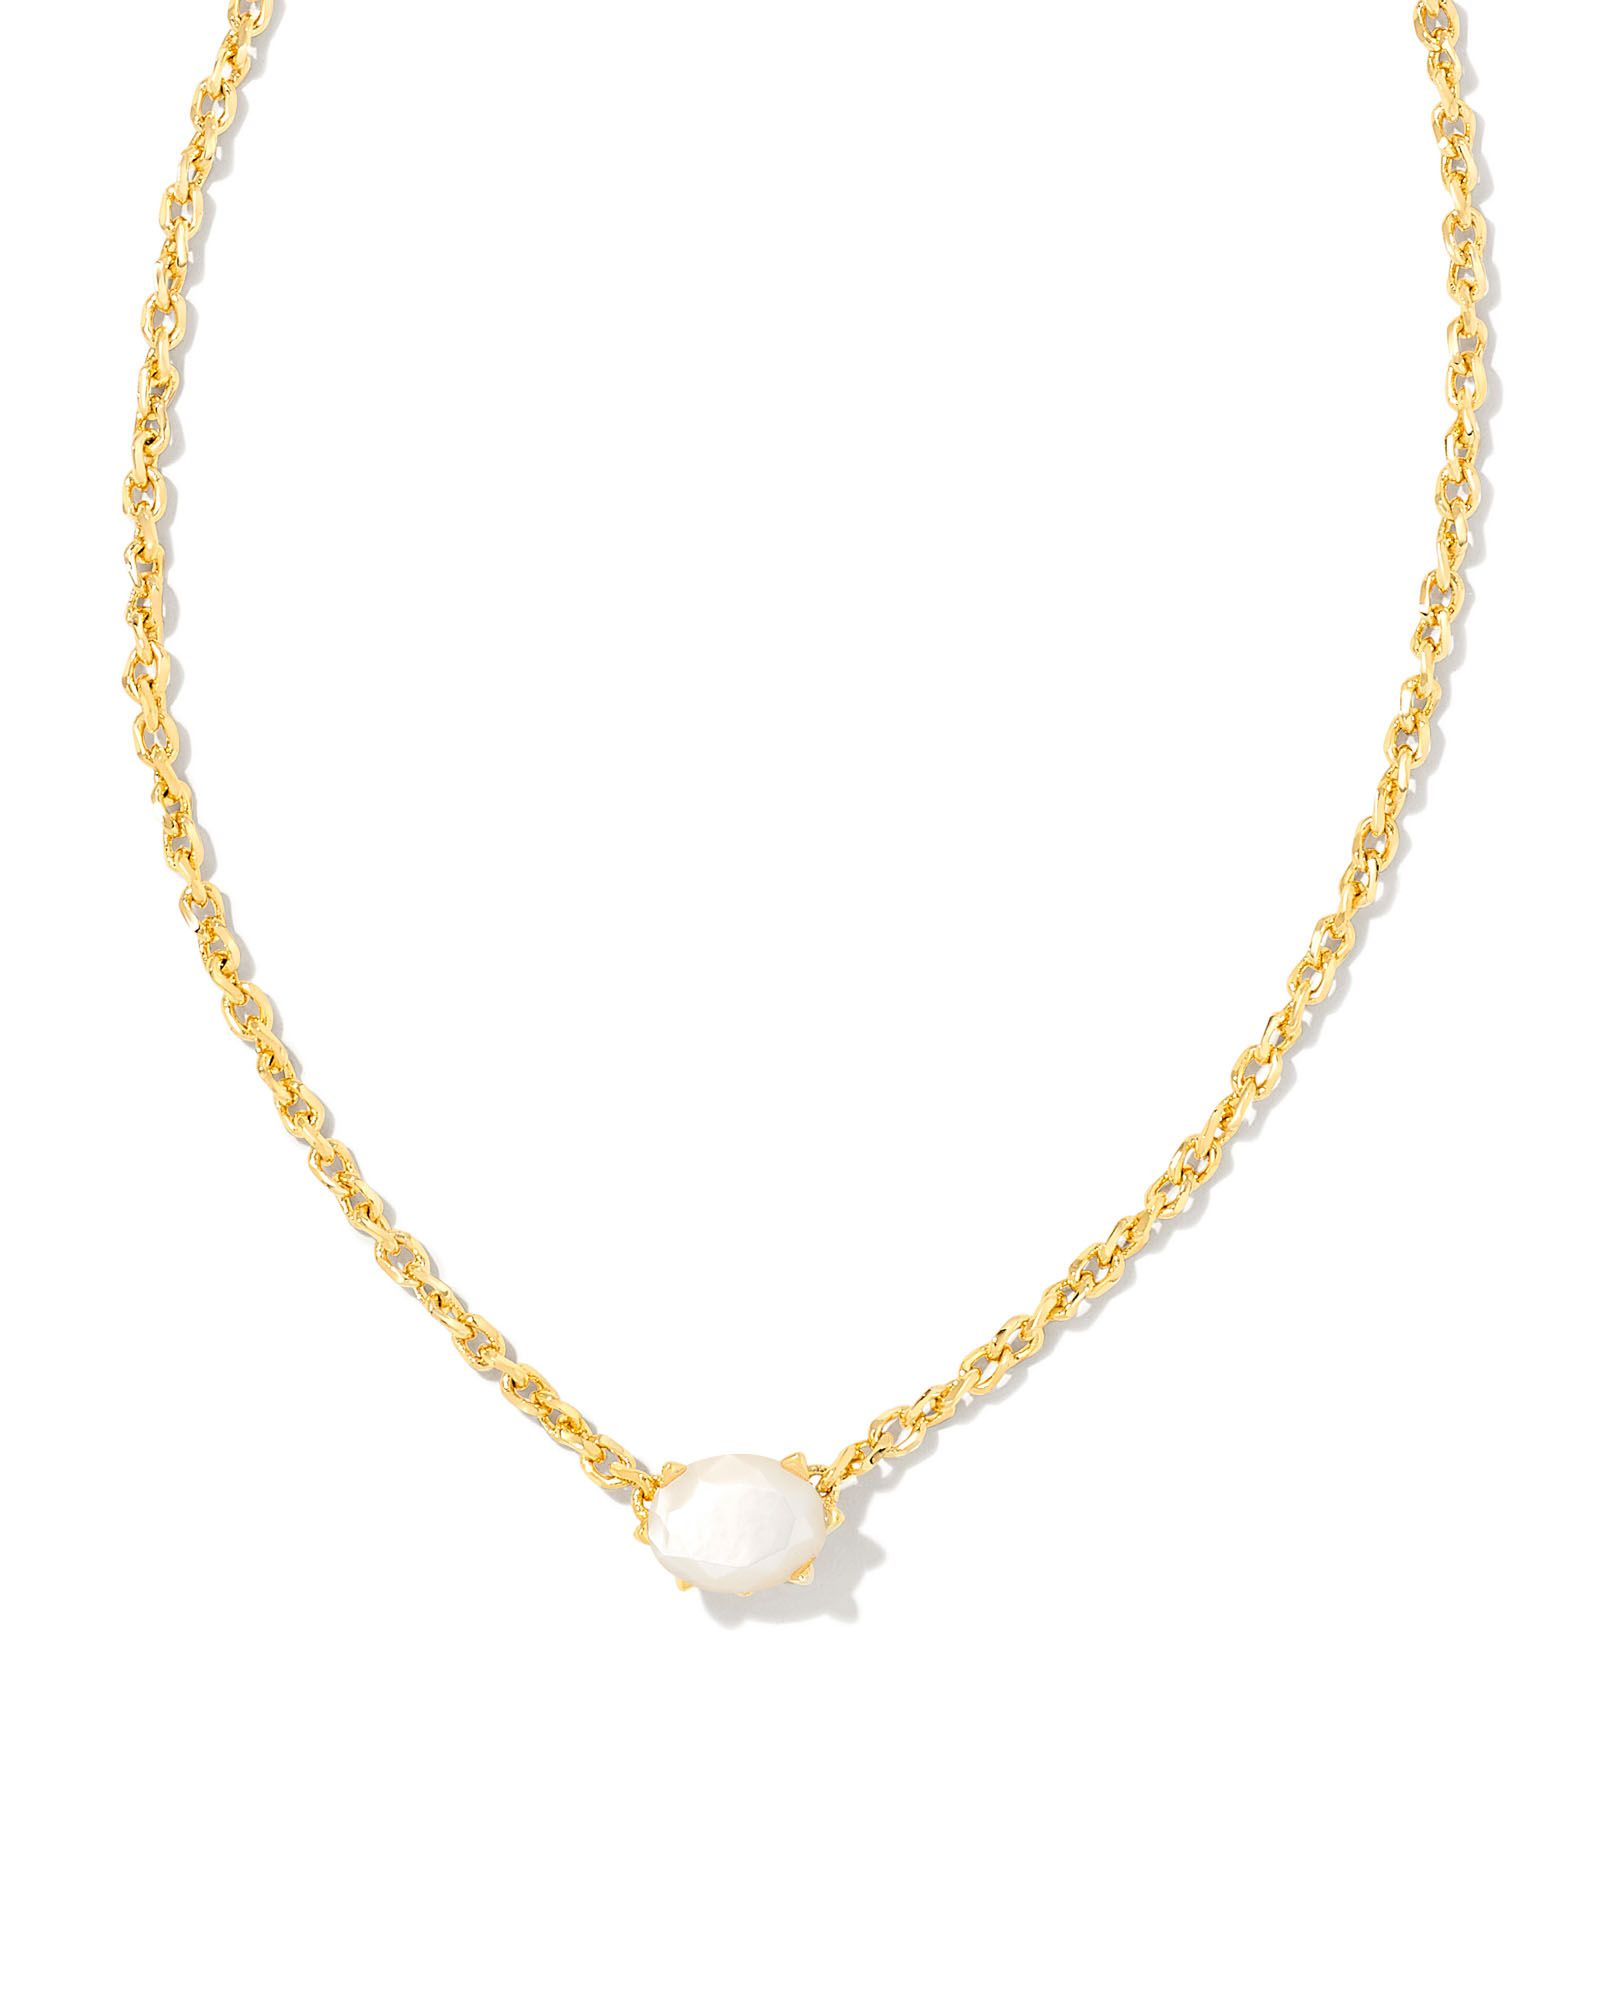 Cailin Gold Pendant Necklace in Ivory Mother-of-Pearl | Kendra Scott | Kendra Scott